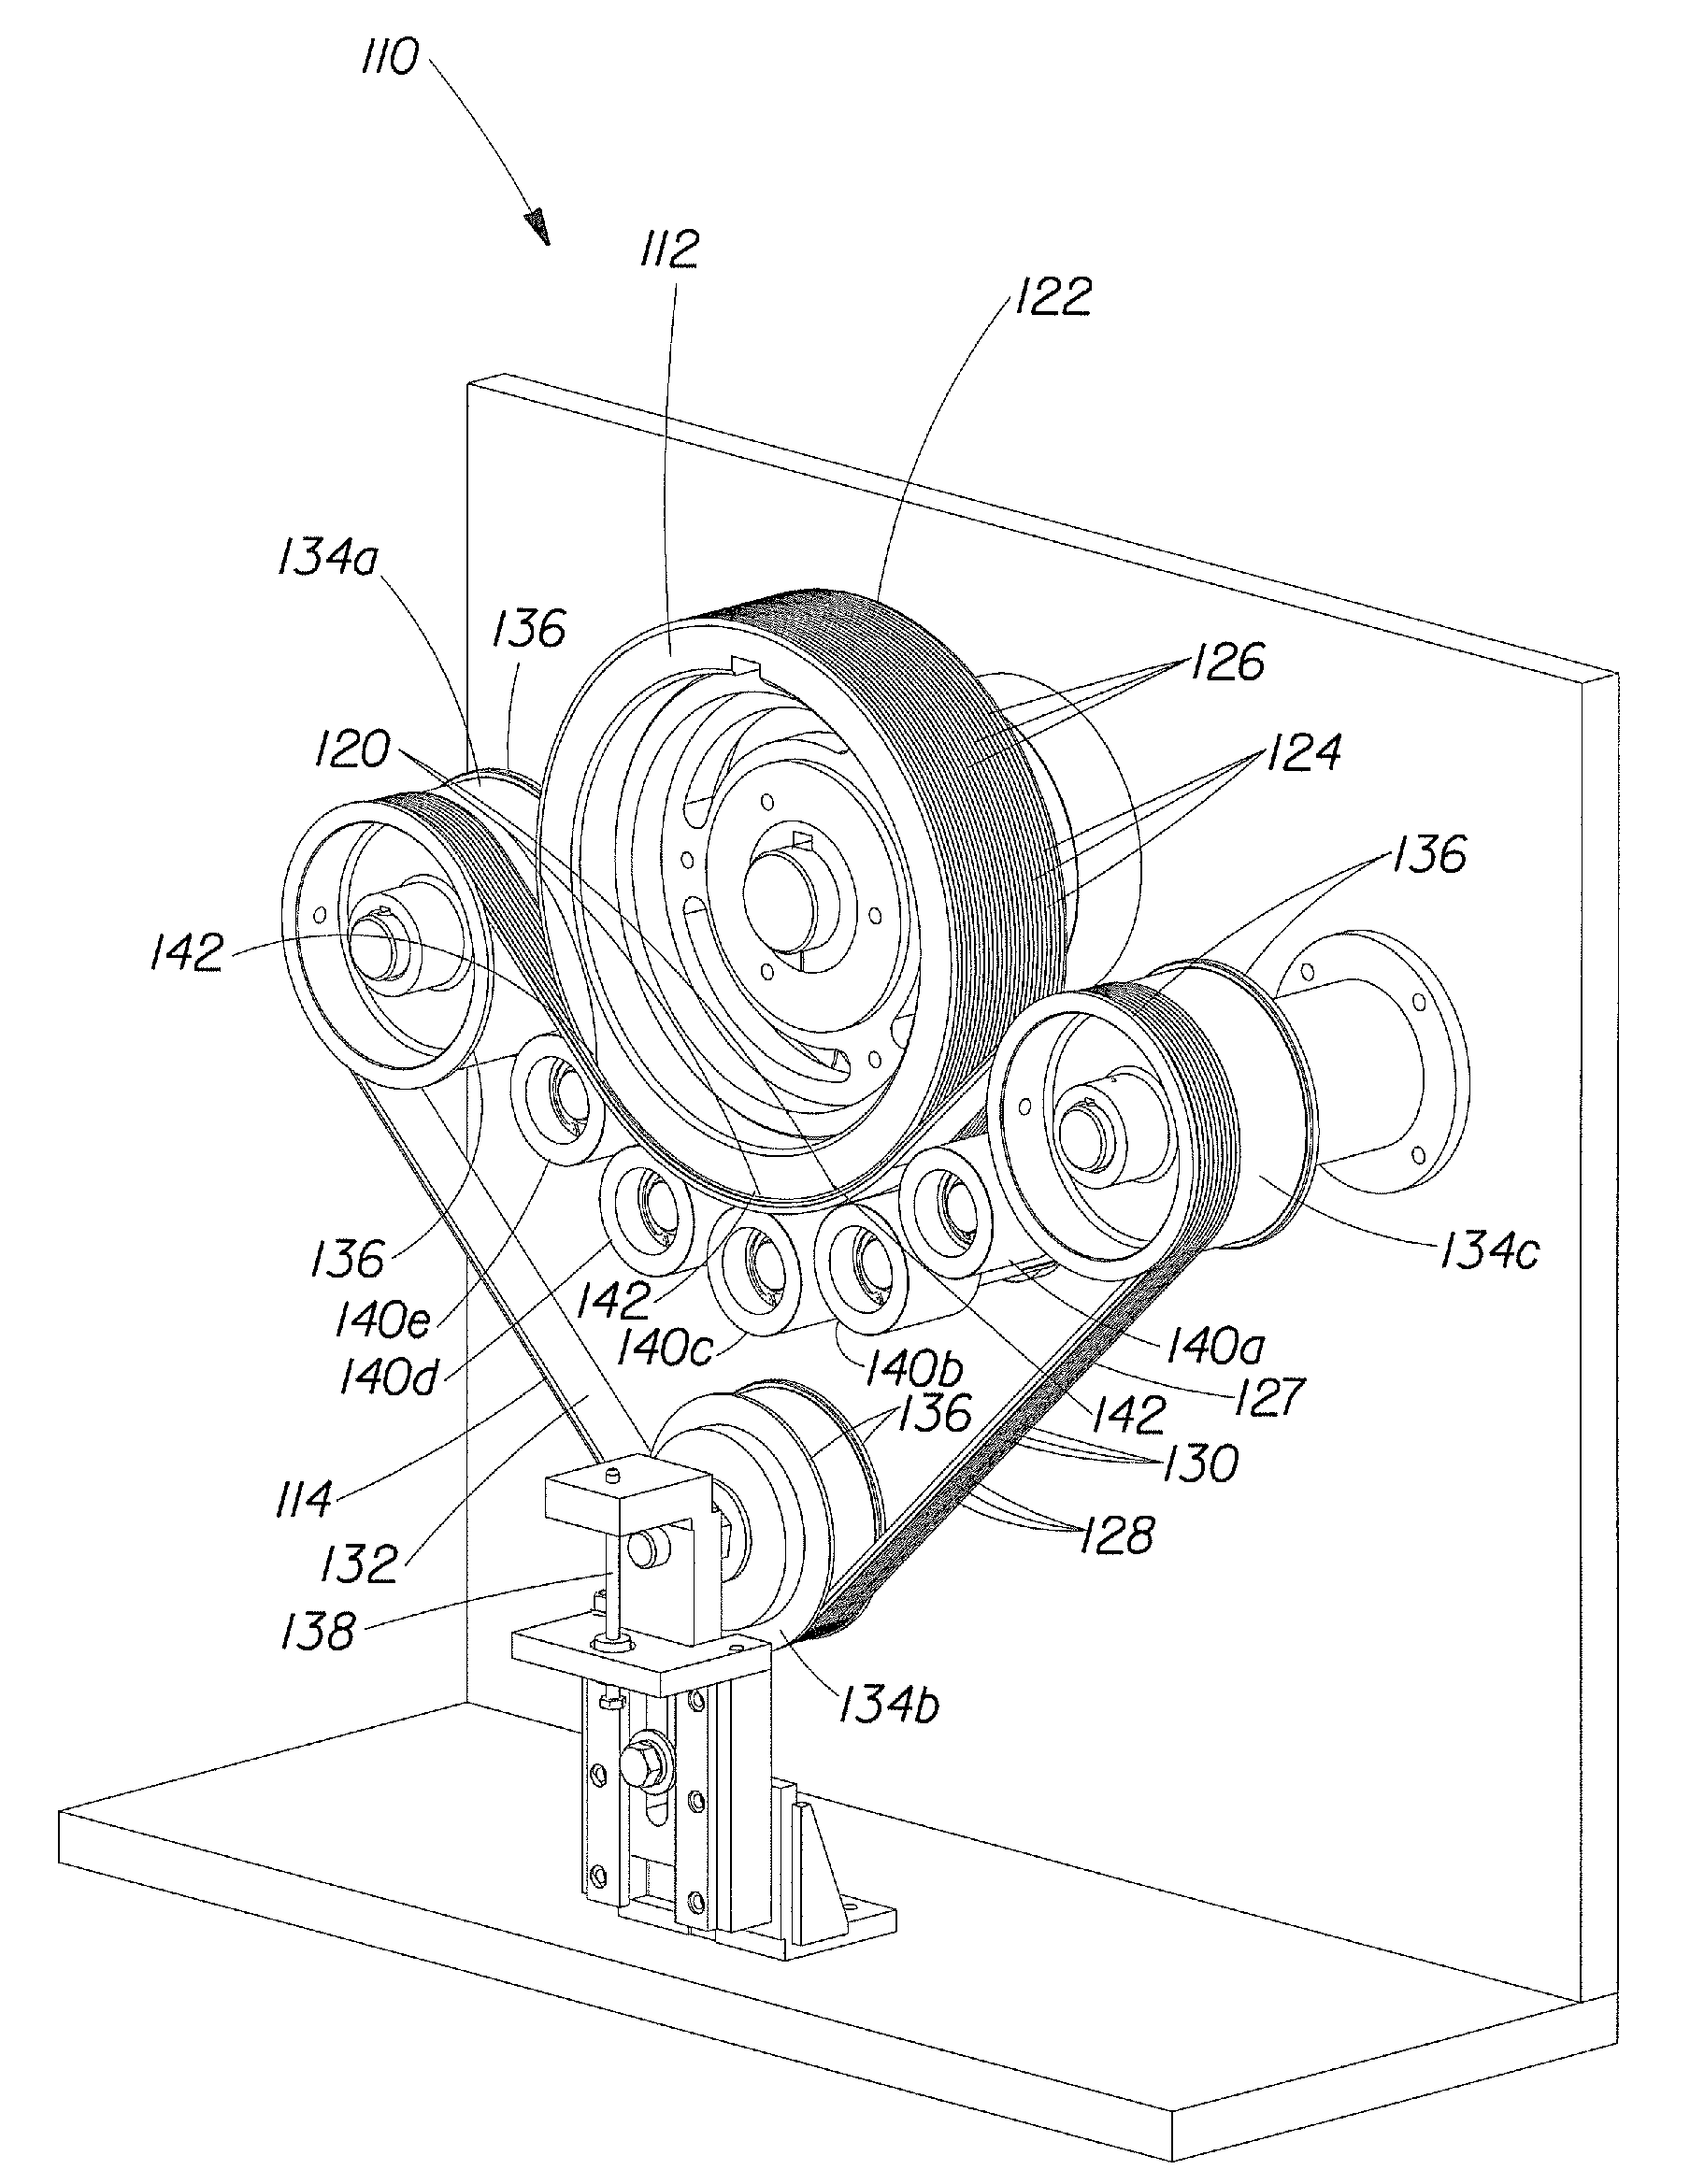 Method and apparatus for incrementally stretching a web